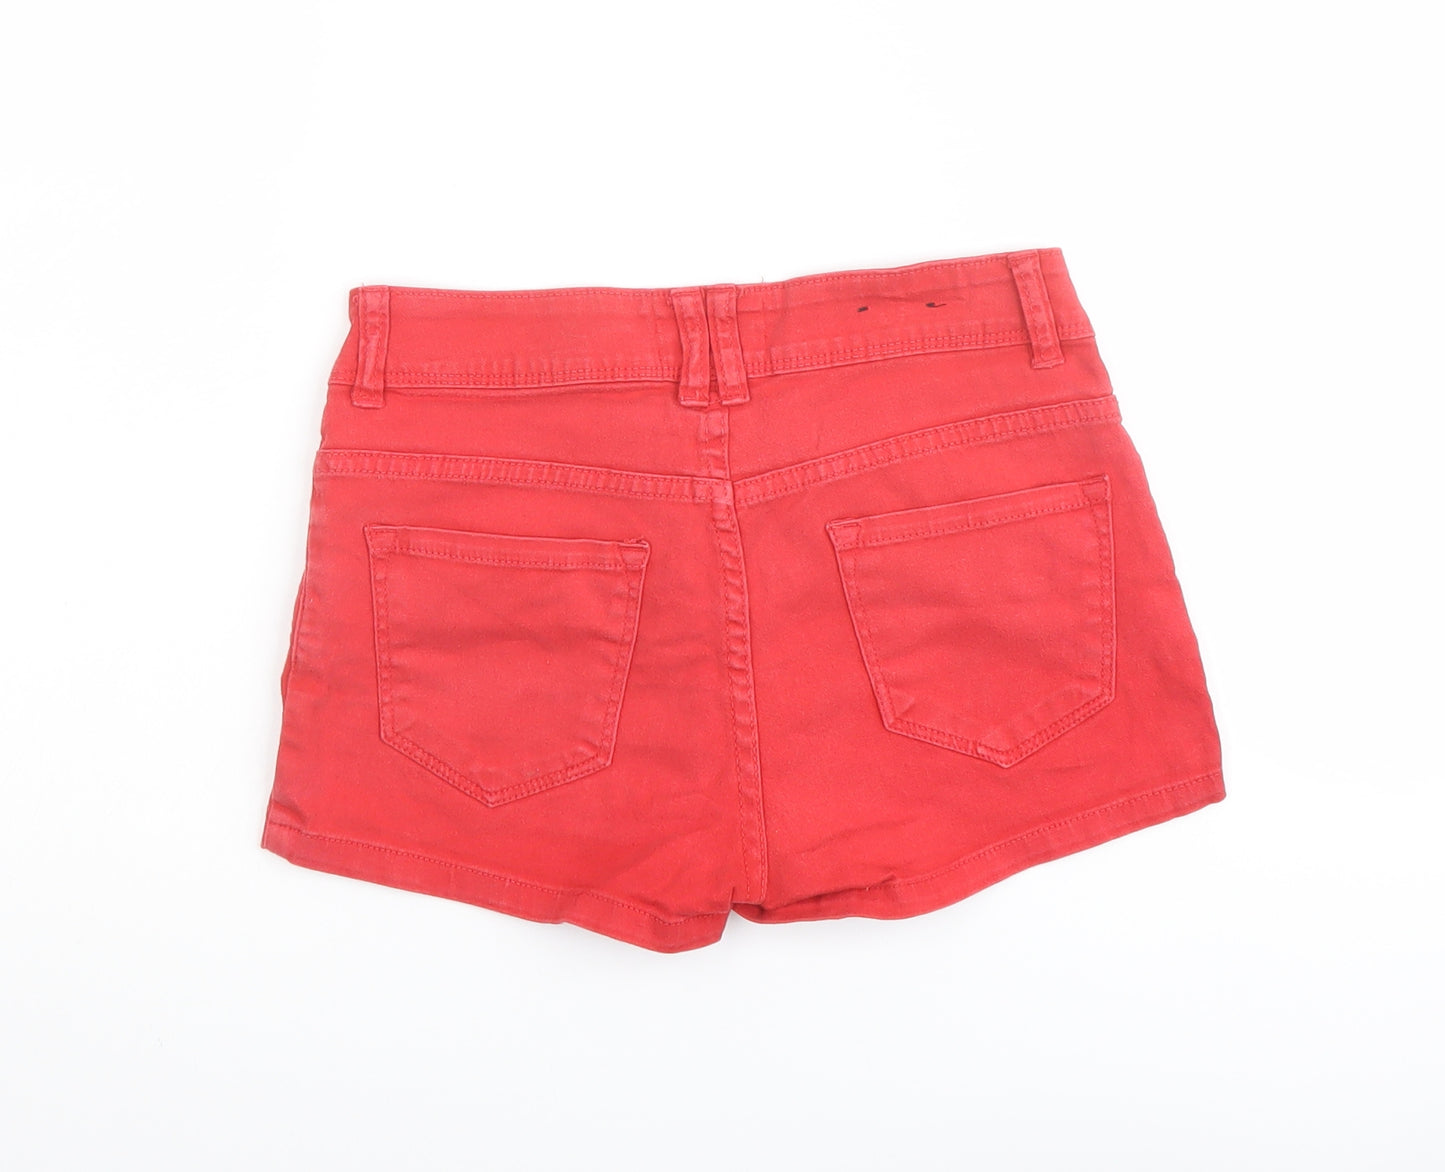 New Look Womens Red Cotton Mom Shorts Size 6 L3 in Regular Button